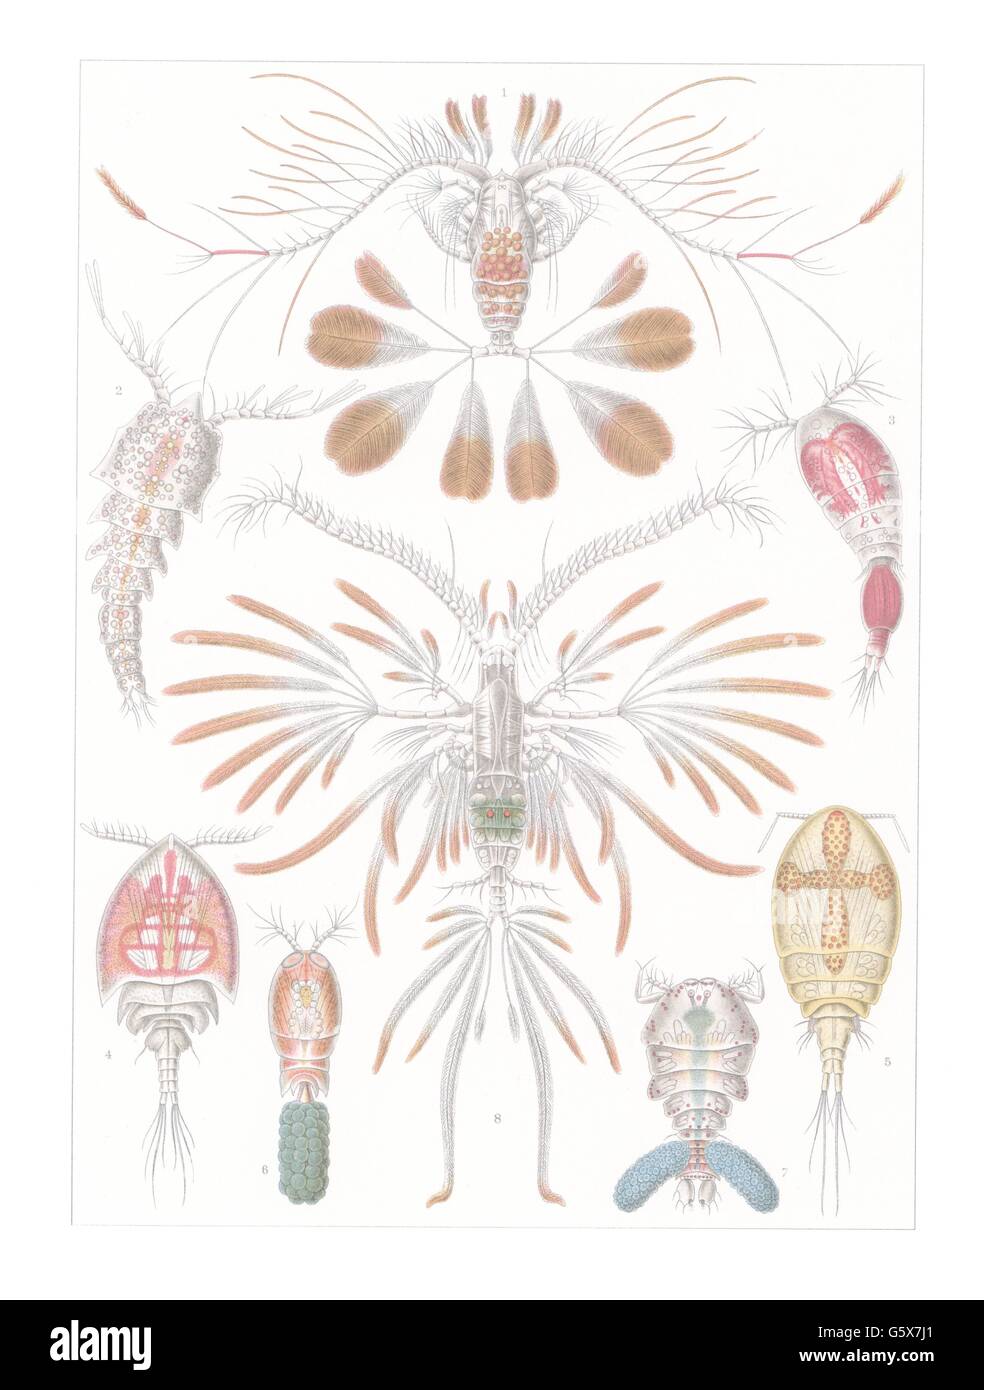 zoology / animals, crustacea, oar-footed crustaceans (Copepoda), colour lithograph, out of: Ernst Haeckel, 'Kunstformen der Natur', Leipzig - Vienna, 1899 - 1904, Additional-Rights-Clearences-Not Available Stock Photo